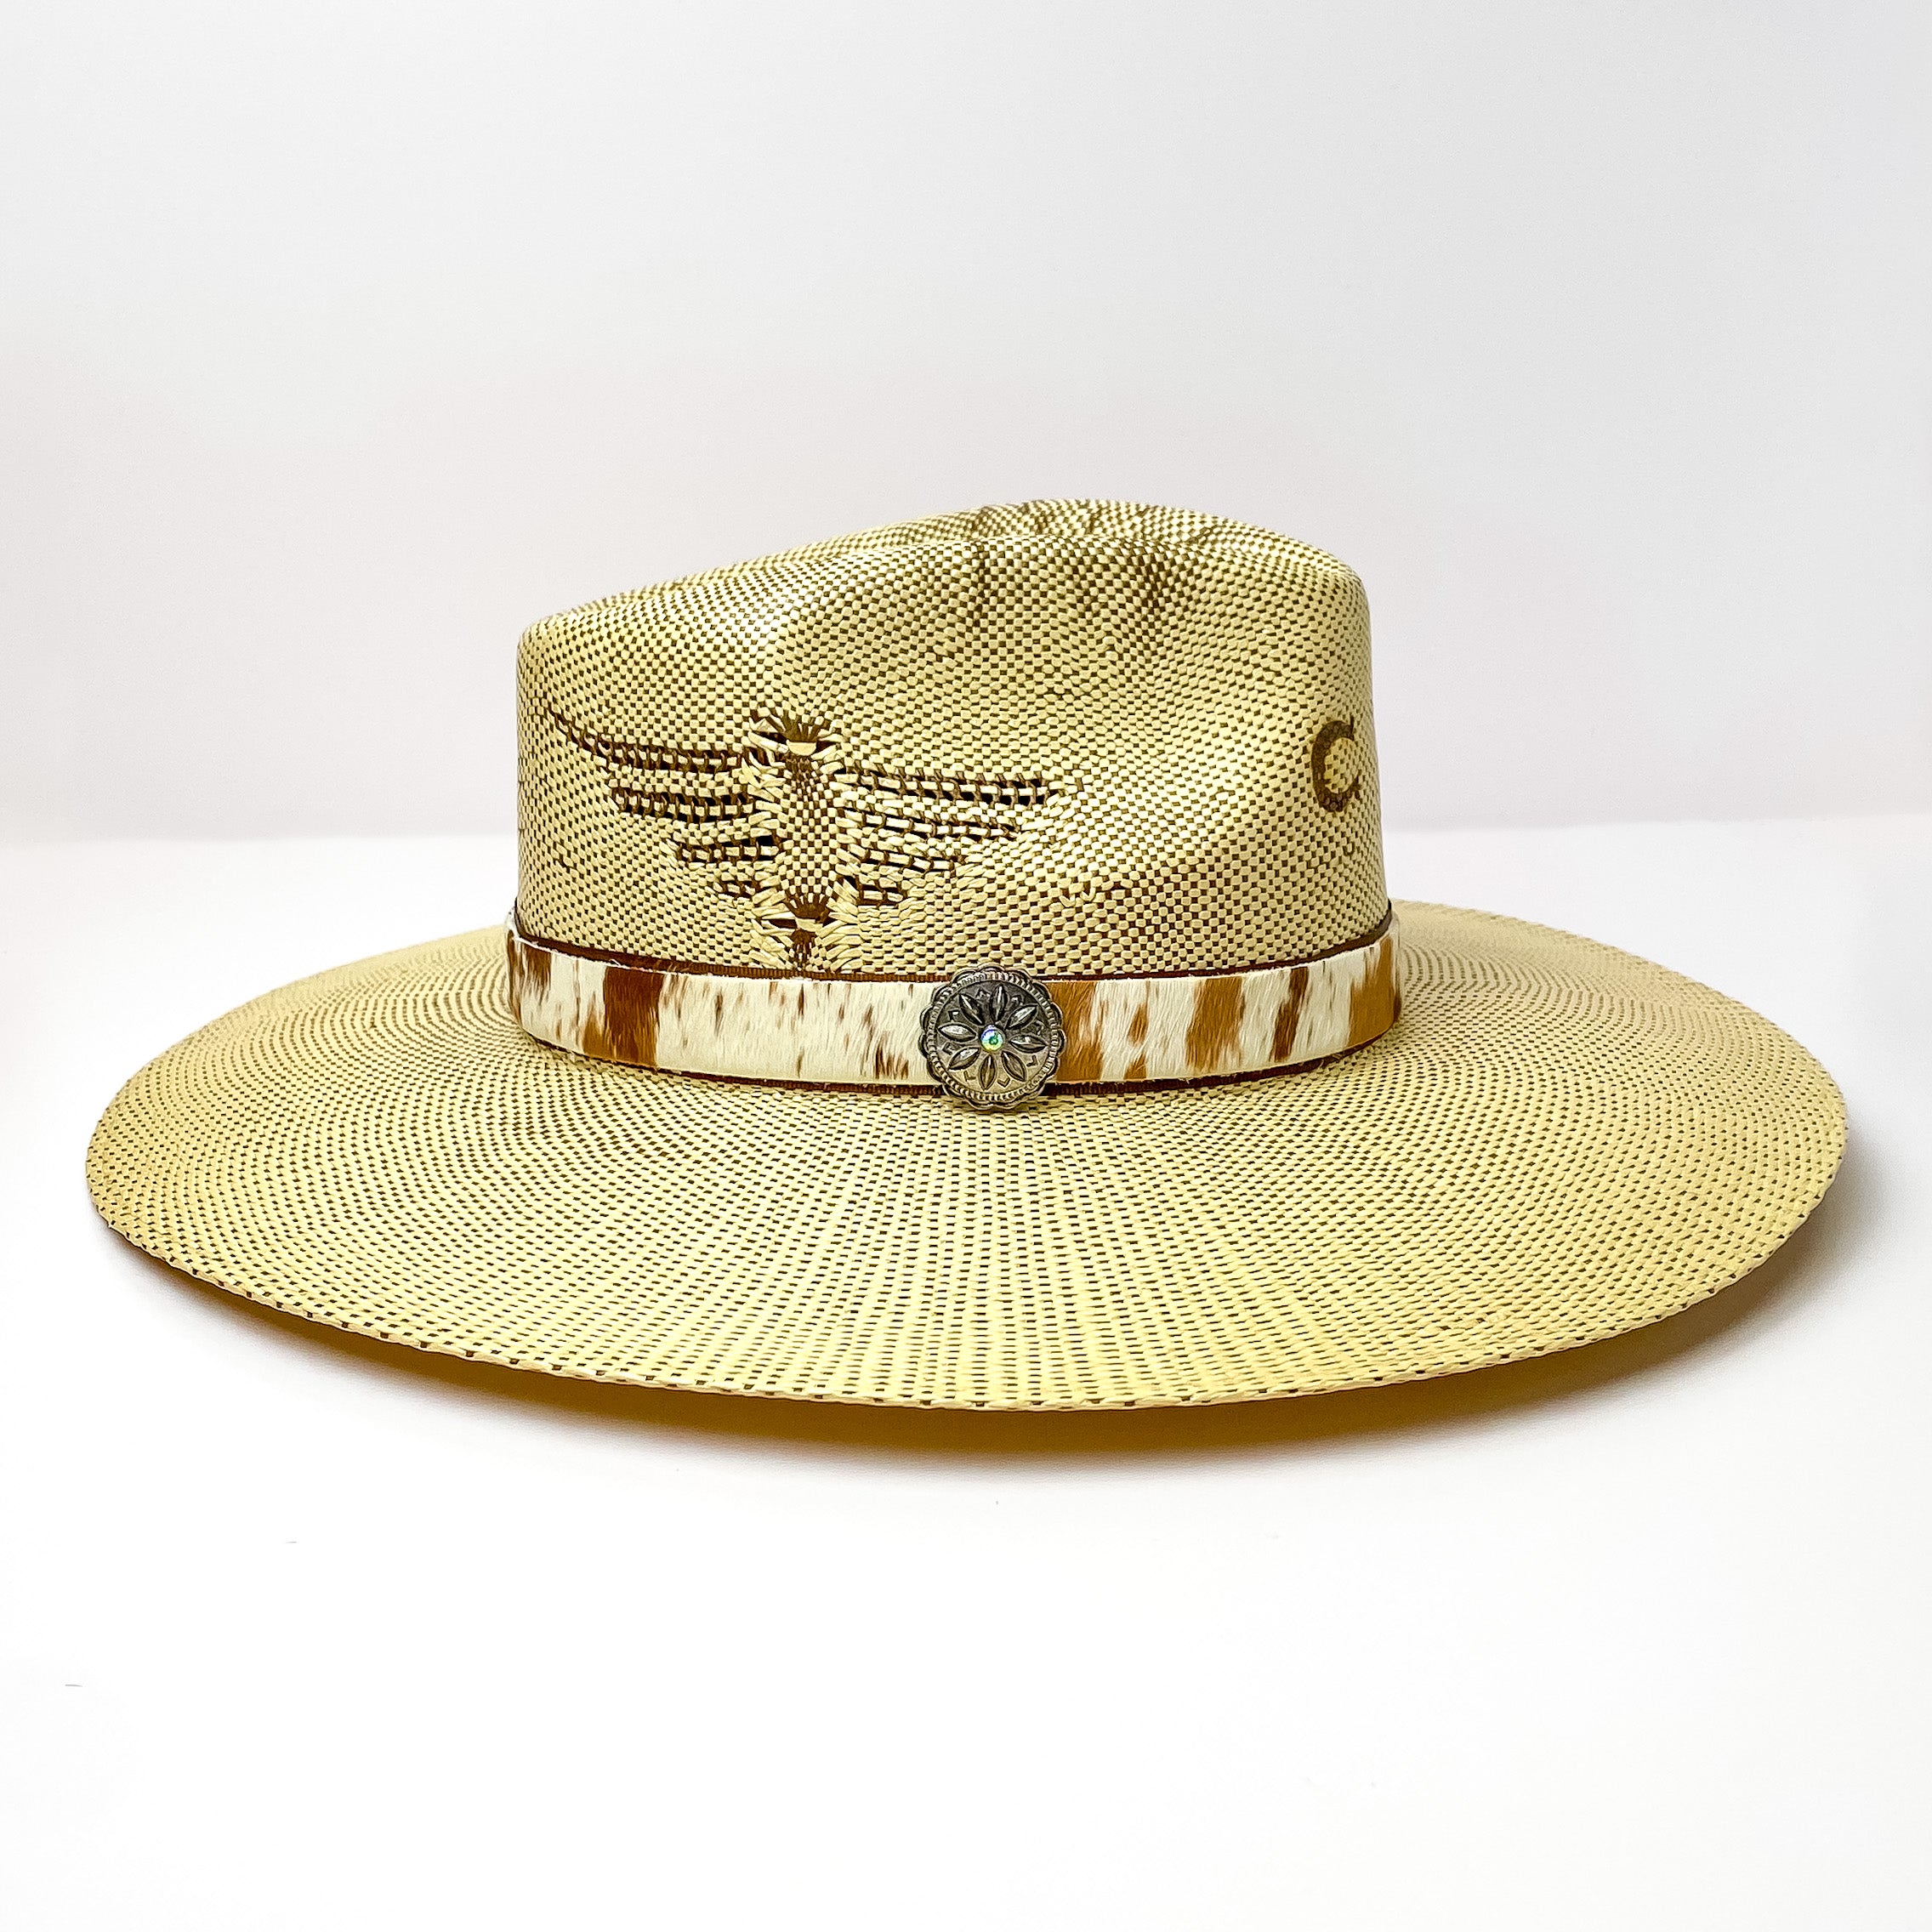 Cow Print Hat Band with Silver Tone Concho Charm in Brown, Tan, and Ivory - Giddy Up Glamour Boutique